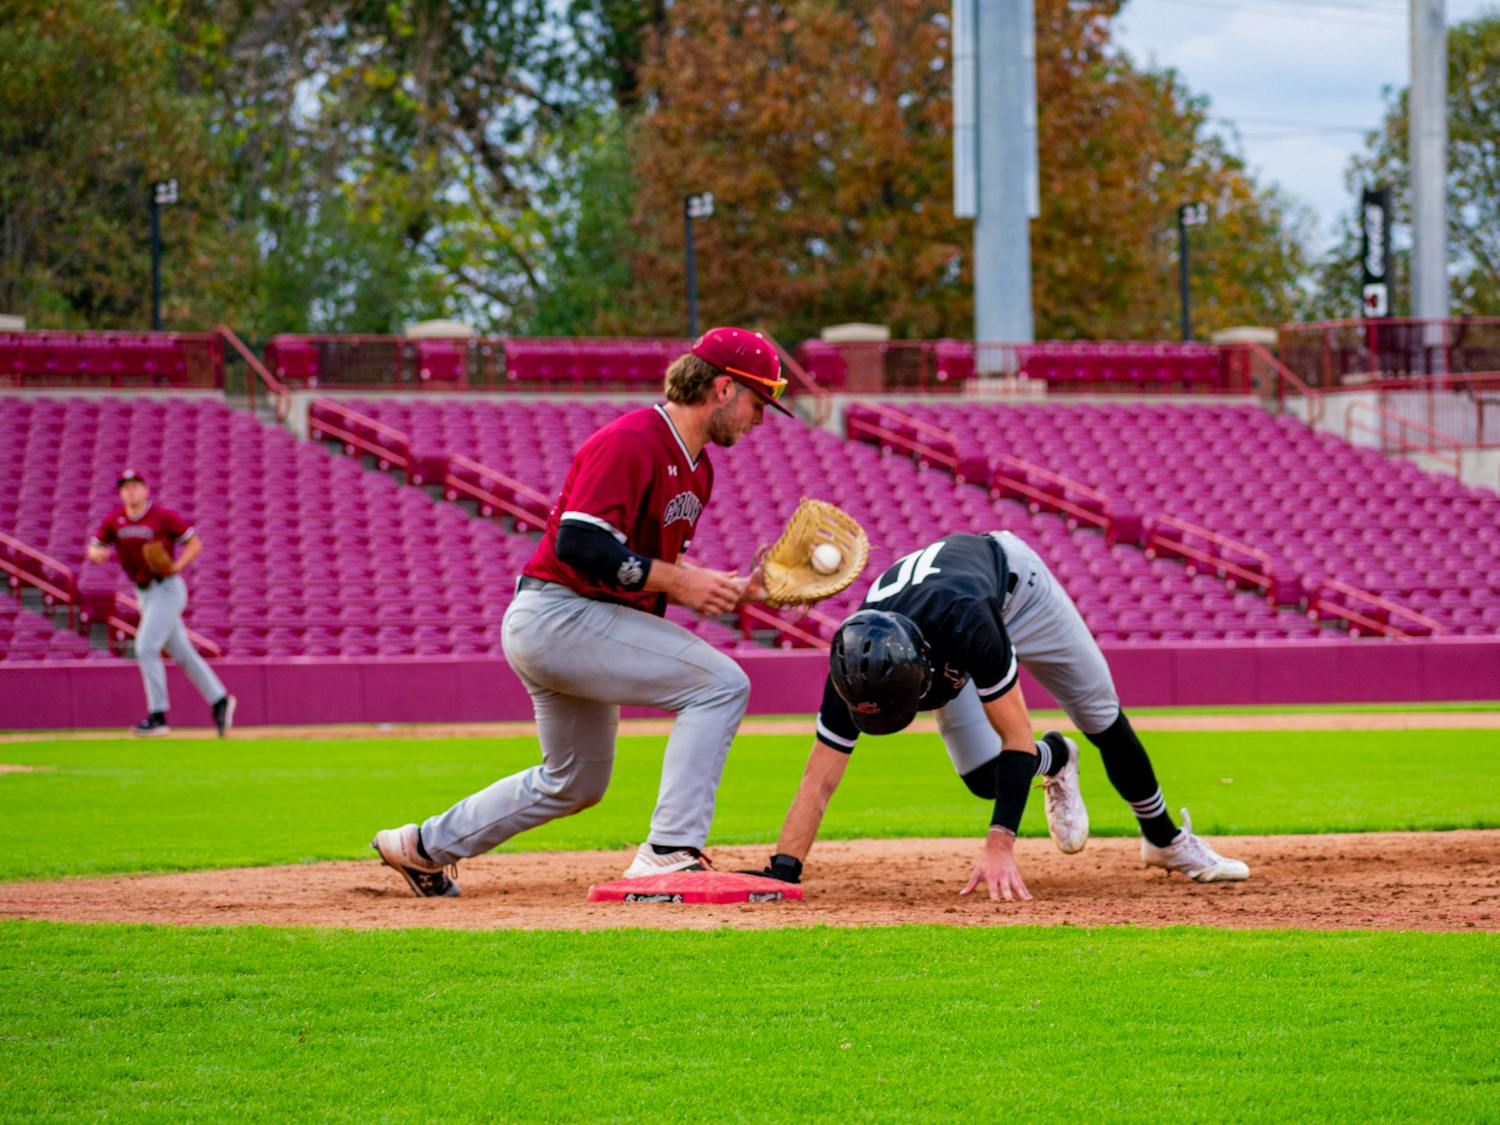 Sophomore catcher/infielder Cole Messina attempts to pick off transfer outfielder Dylan Brewer at first base during an intrasquad scrimmage on Nov. 2, 2022. Messina and the Garnet team went on to win the three game Garnet and Black World Series later in the week.